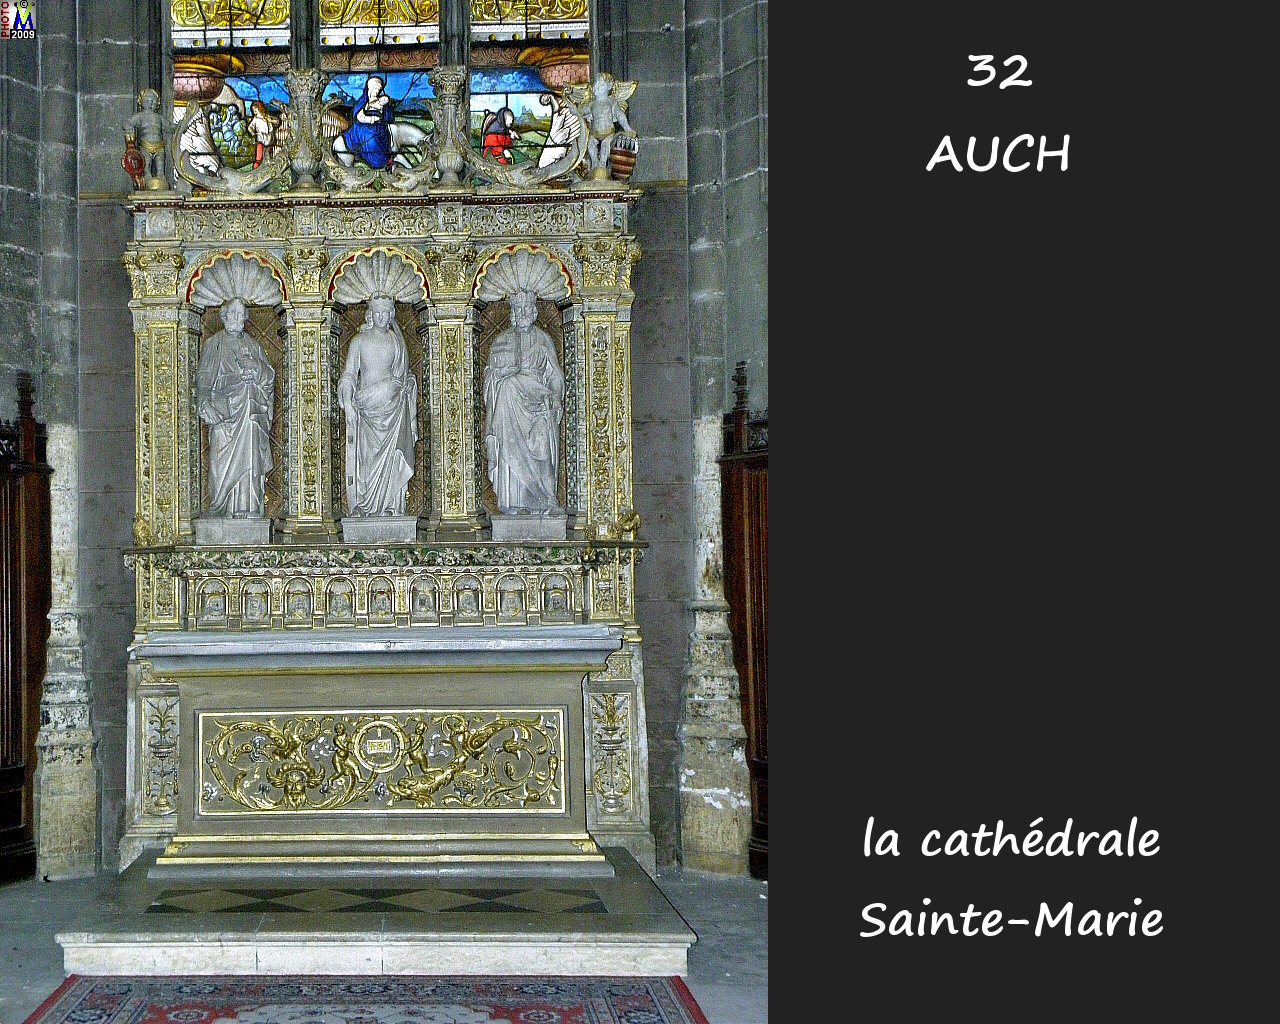 32AUCH_cathedrale_232.jpg